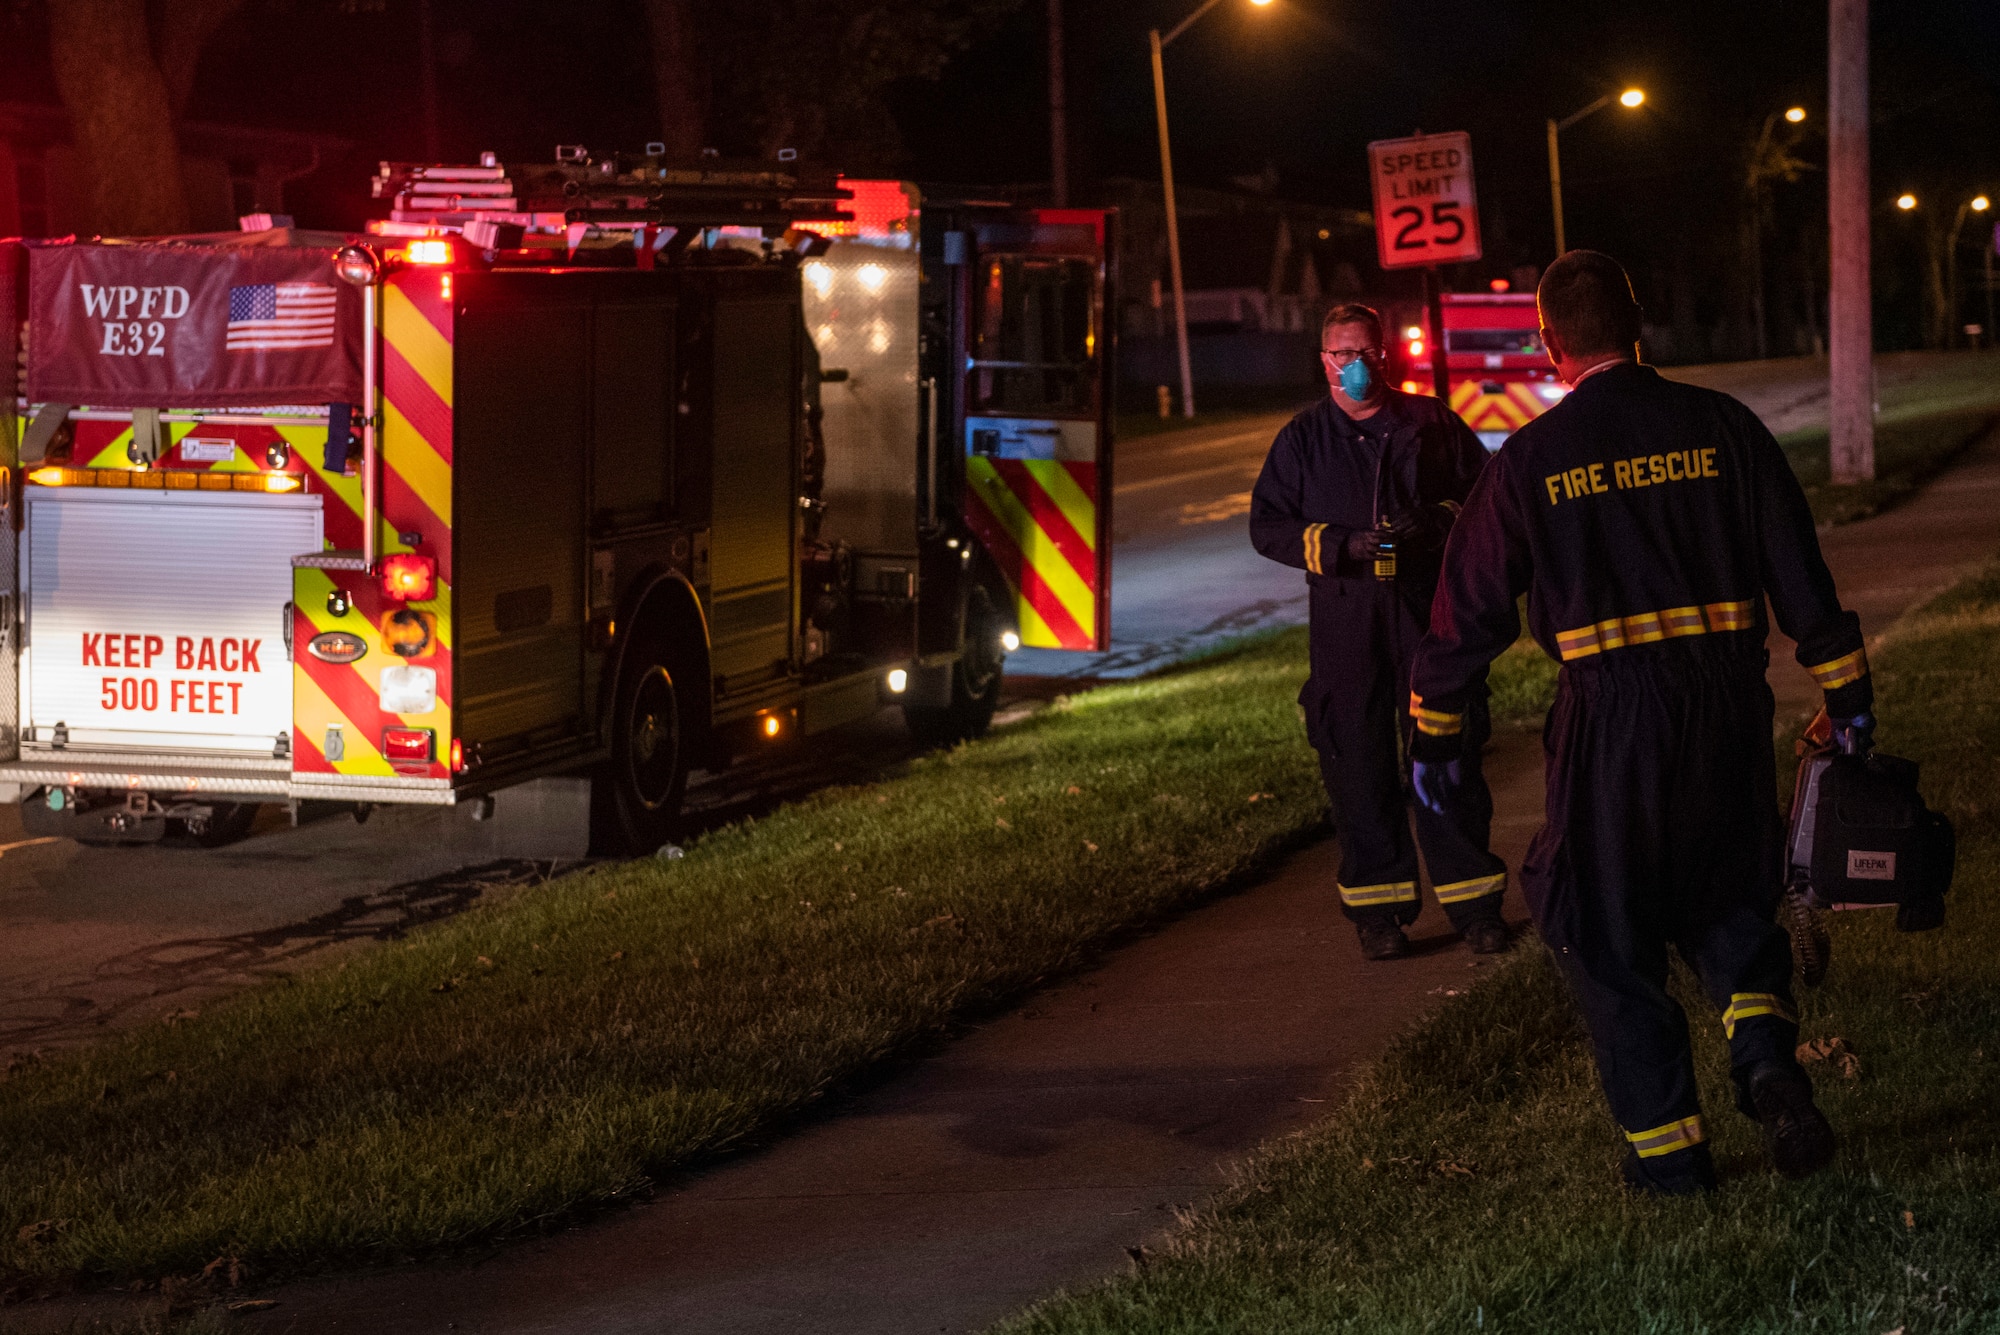 Firefighters return to their truck after responding to a call for medical help in base housing, June 23, 2021 at Wright-Patterson Air Force Base, Ohio.  The base has three stations strategically located to ensure a response time of 5 minutes or less when the call comes in. (U.S. Air Force photo by Wesley Farnsworth)